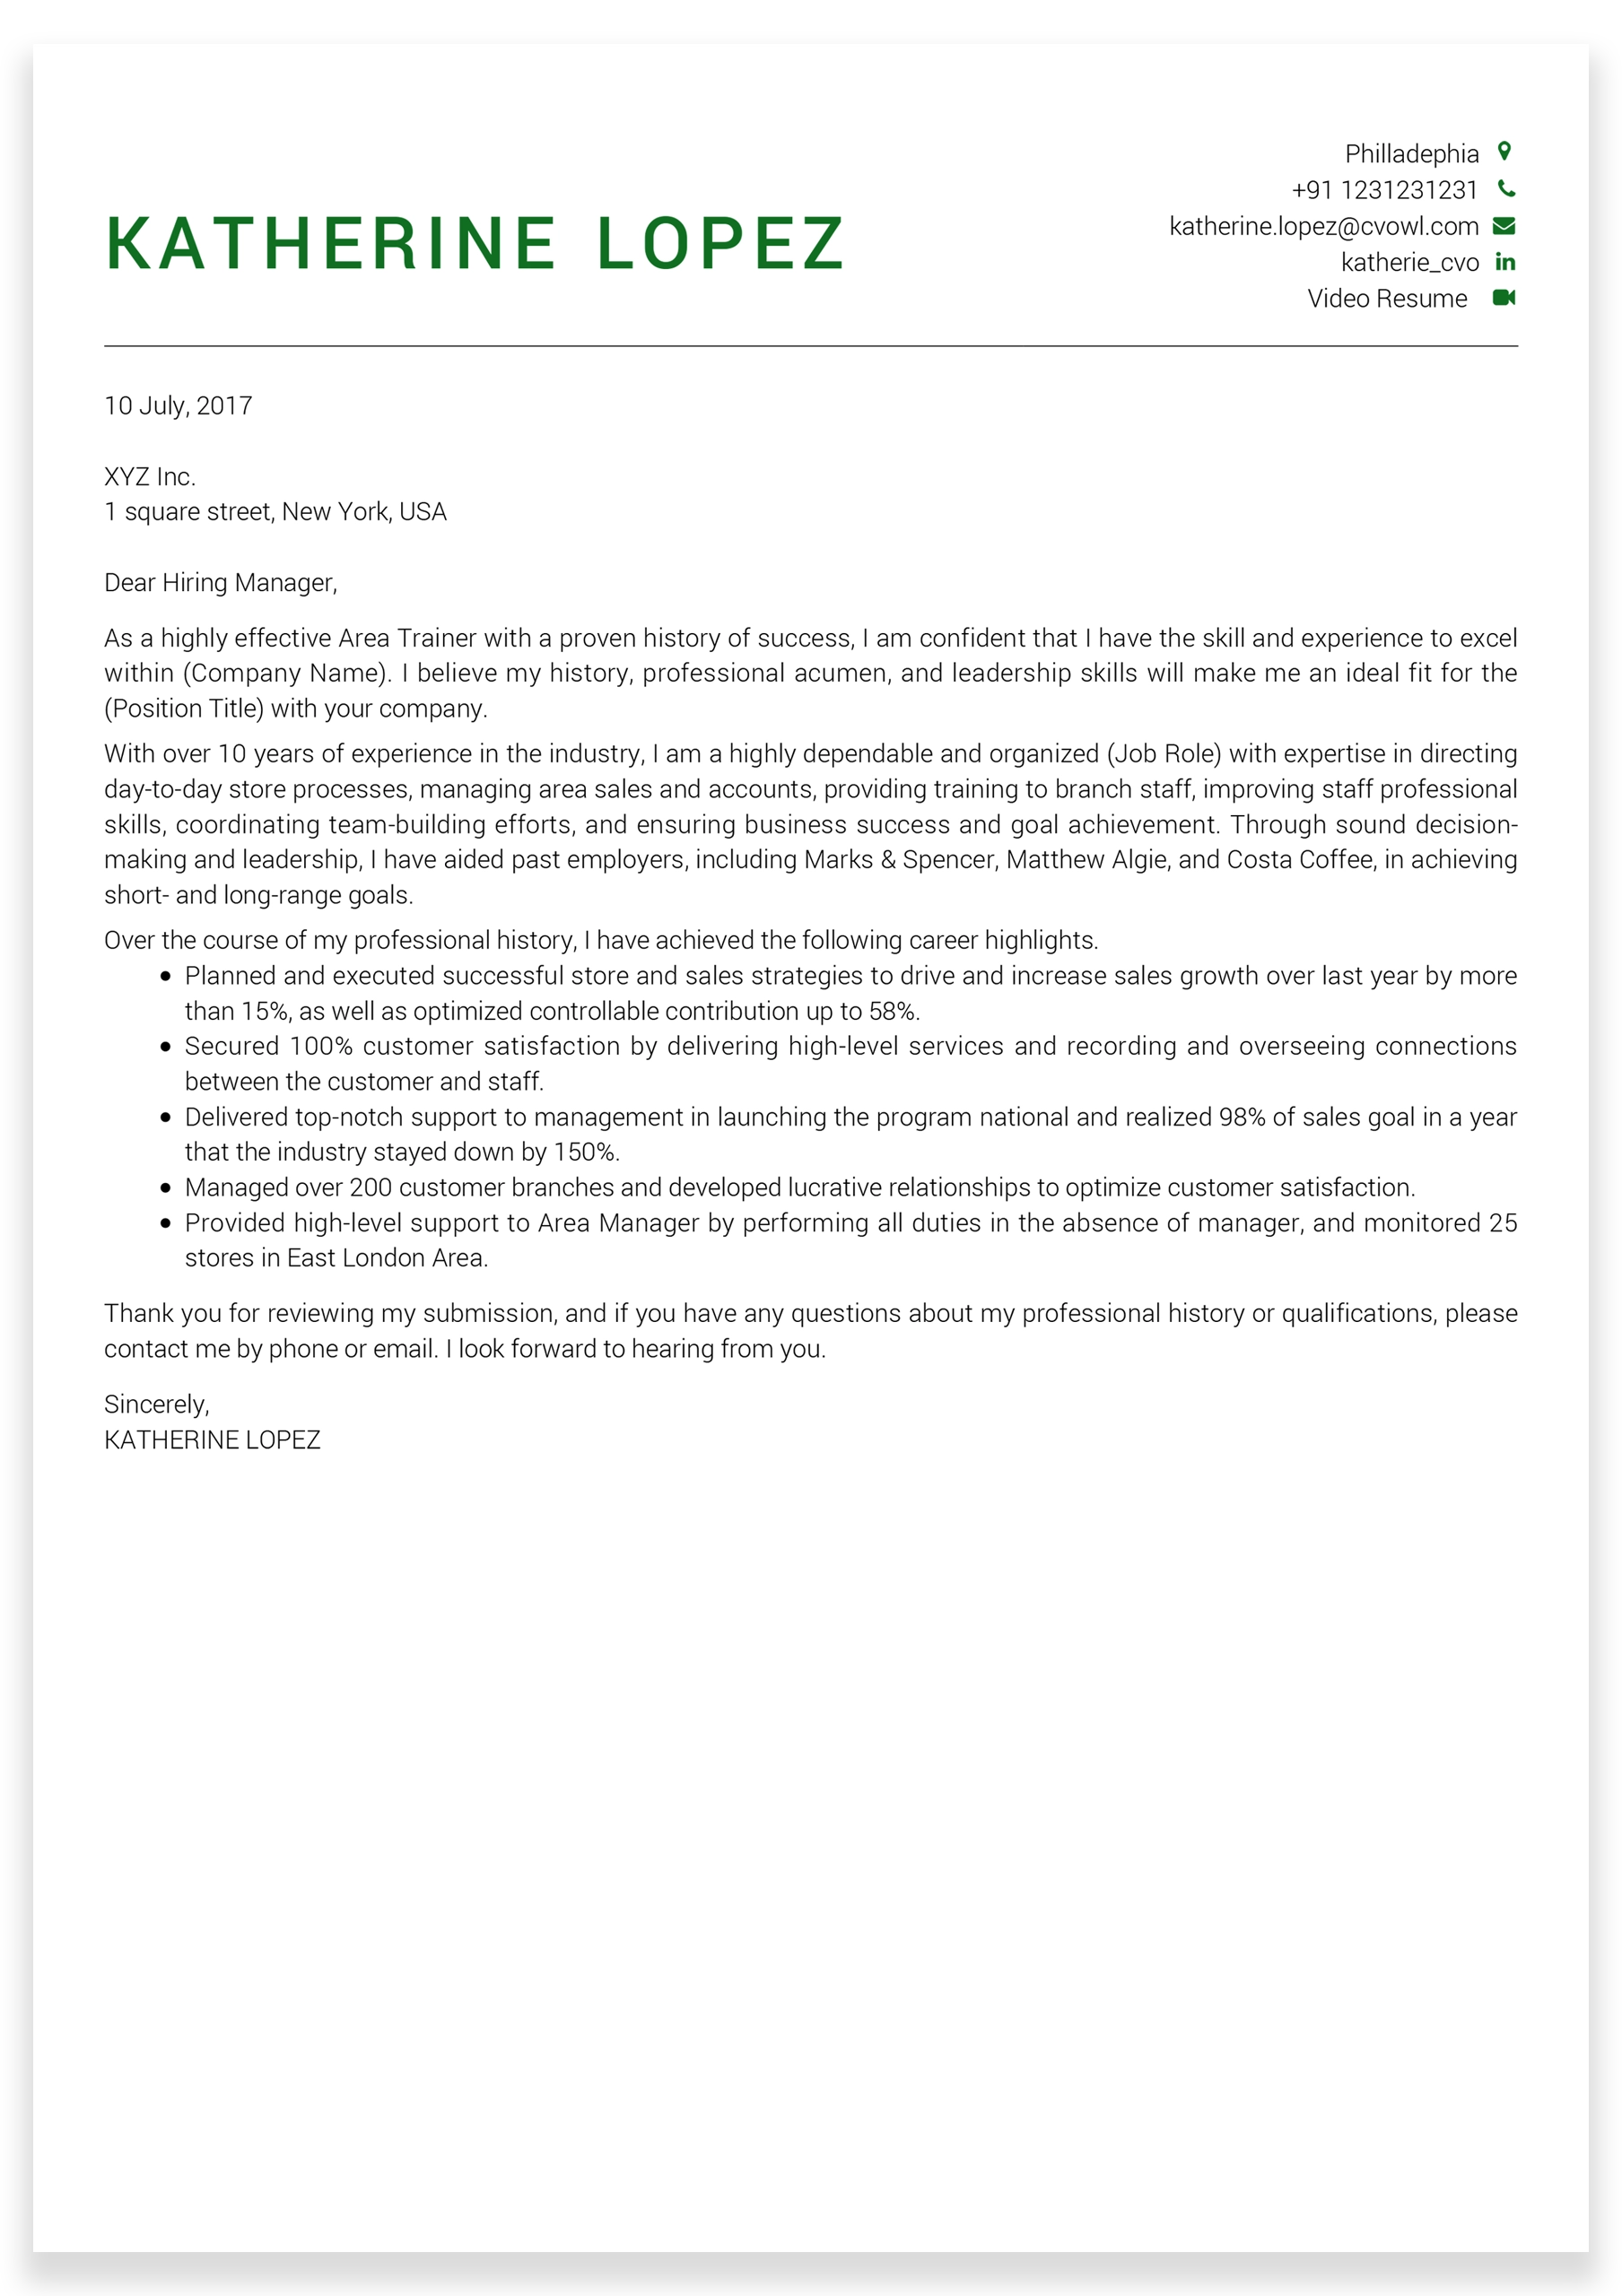 Technical-Assistant-Cover-Letter-sample7